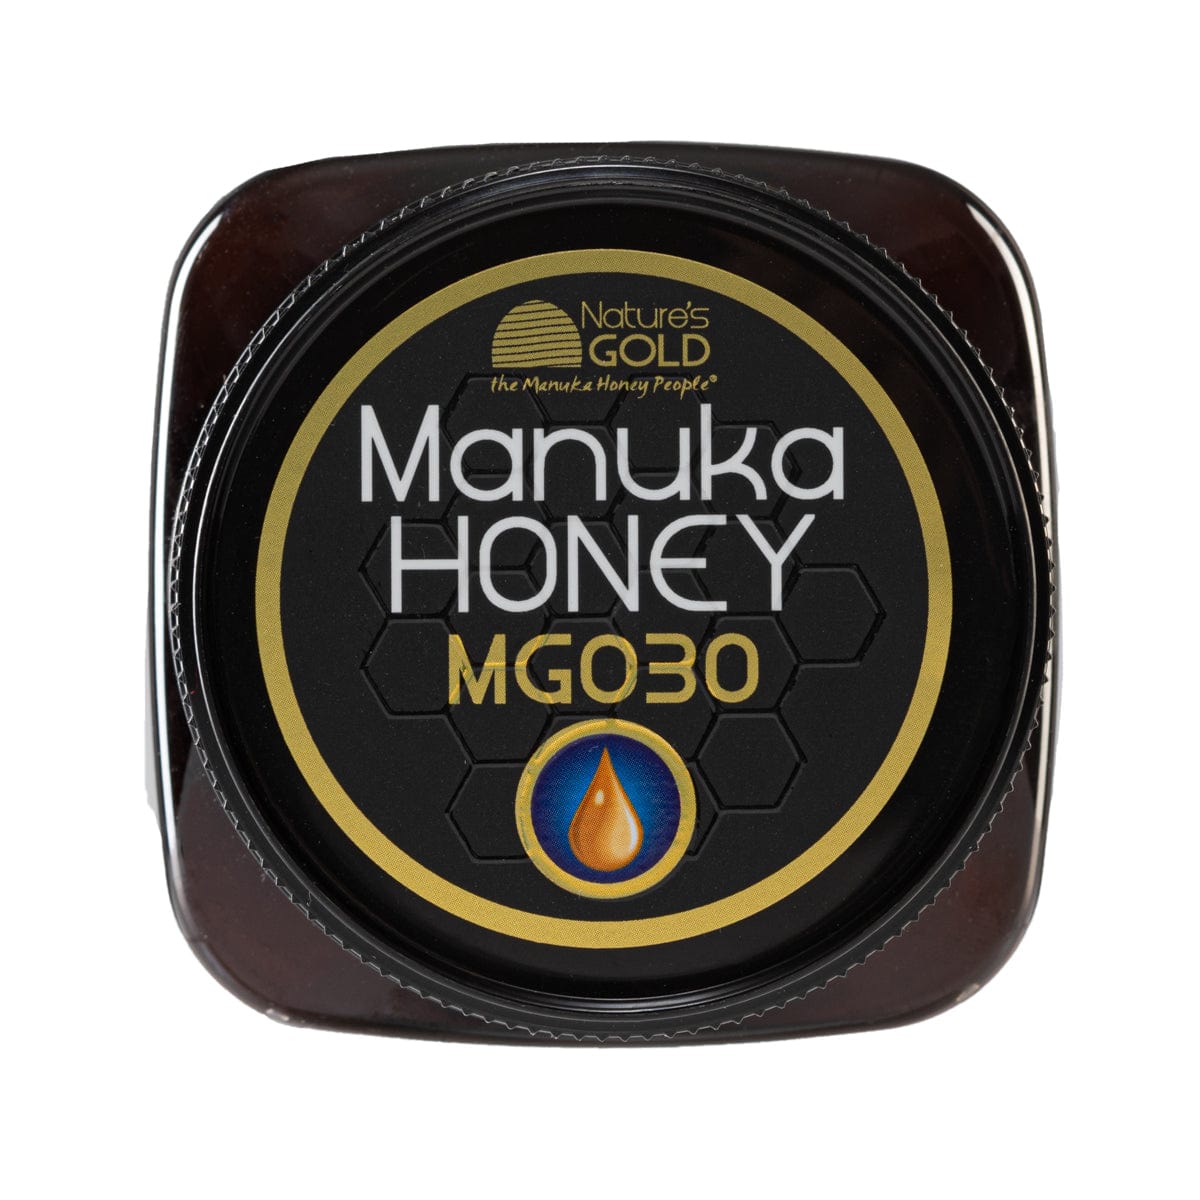 MGO 30 -100% RAW AUSTRALIAN MANUKA HONEY - Ideal to use as a natural sweetener or table honey. SALE 15% OFF